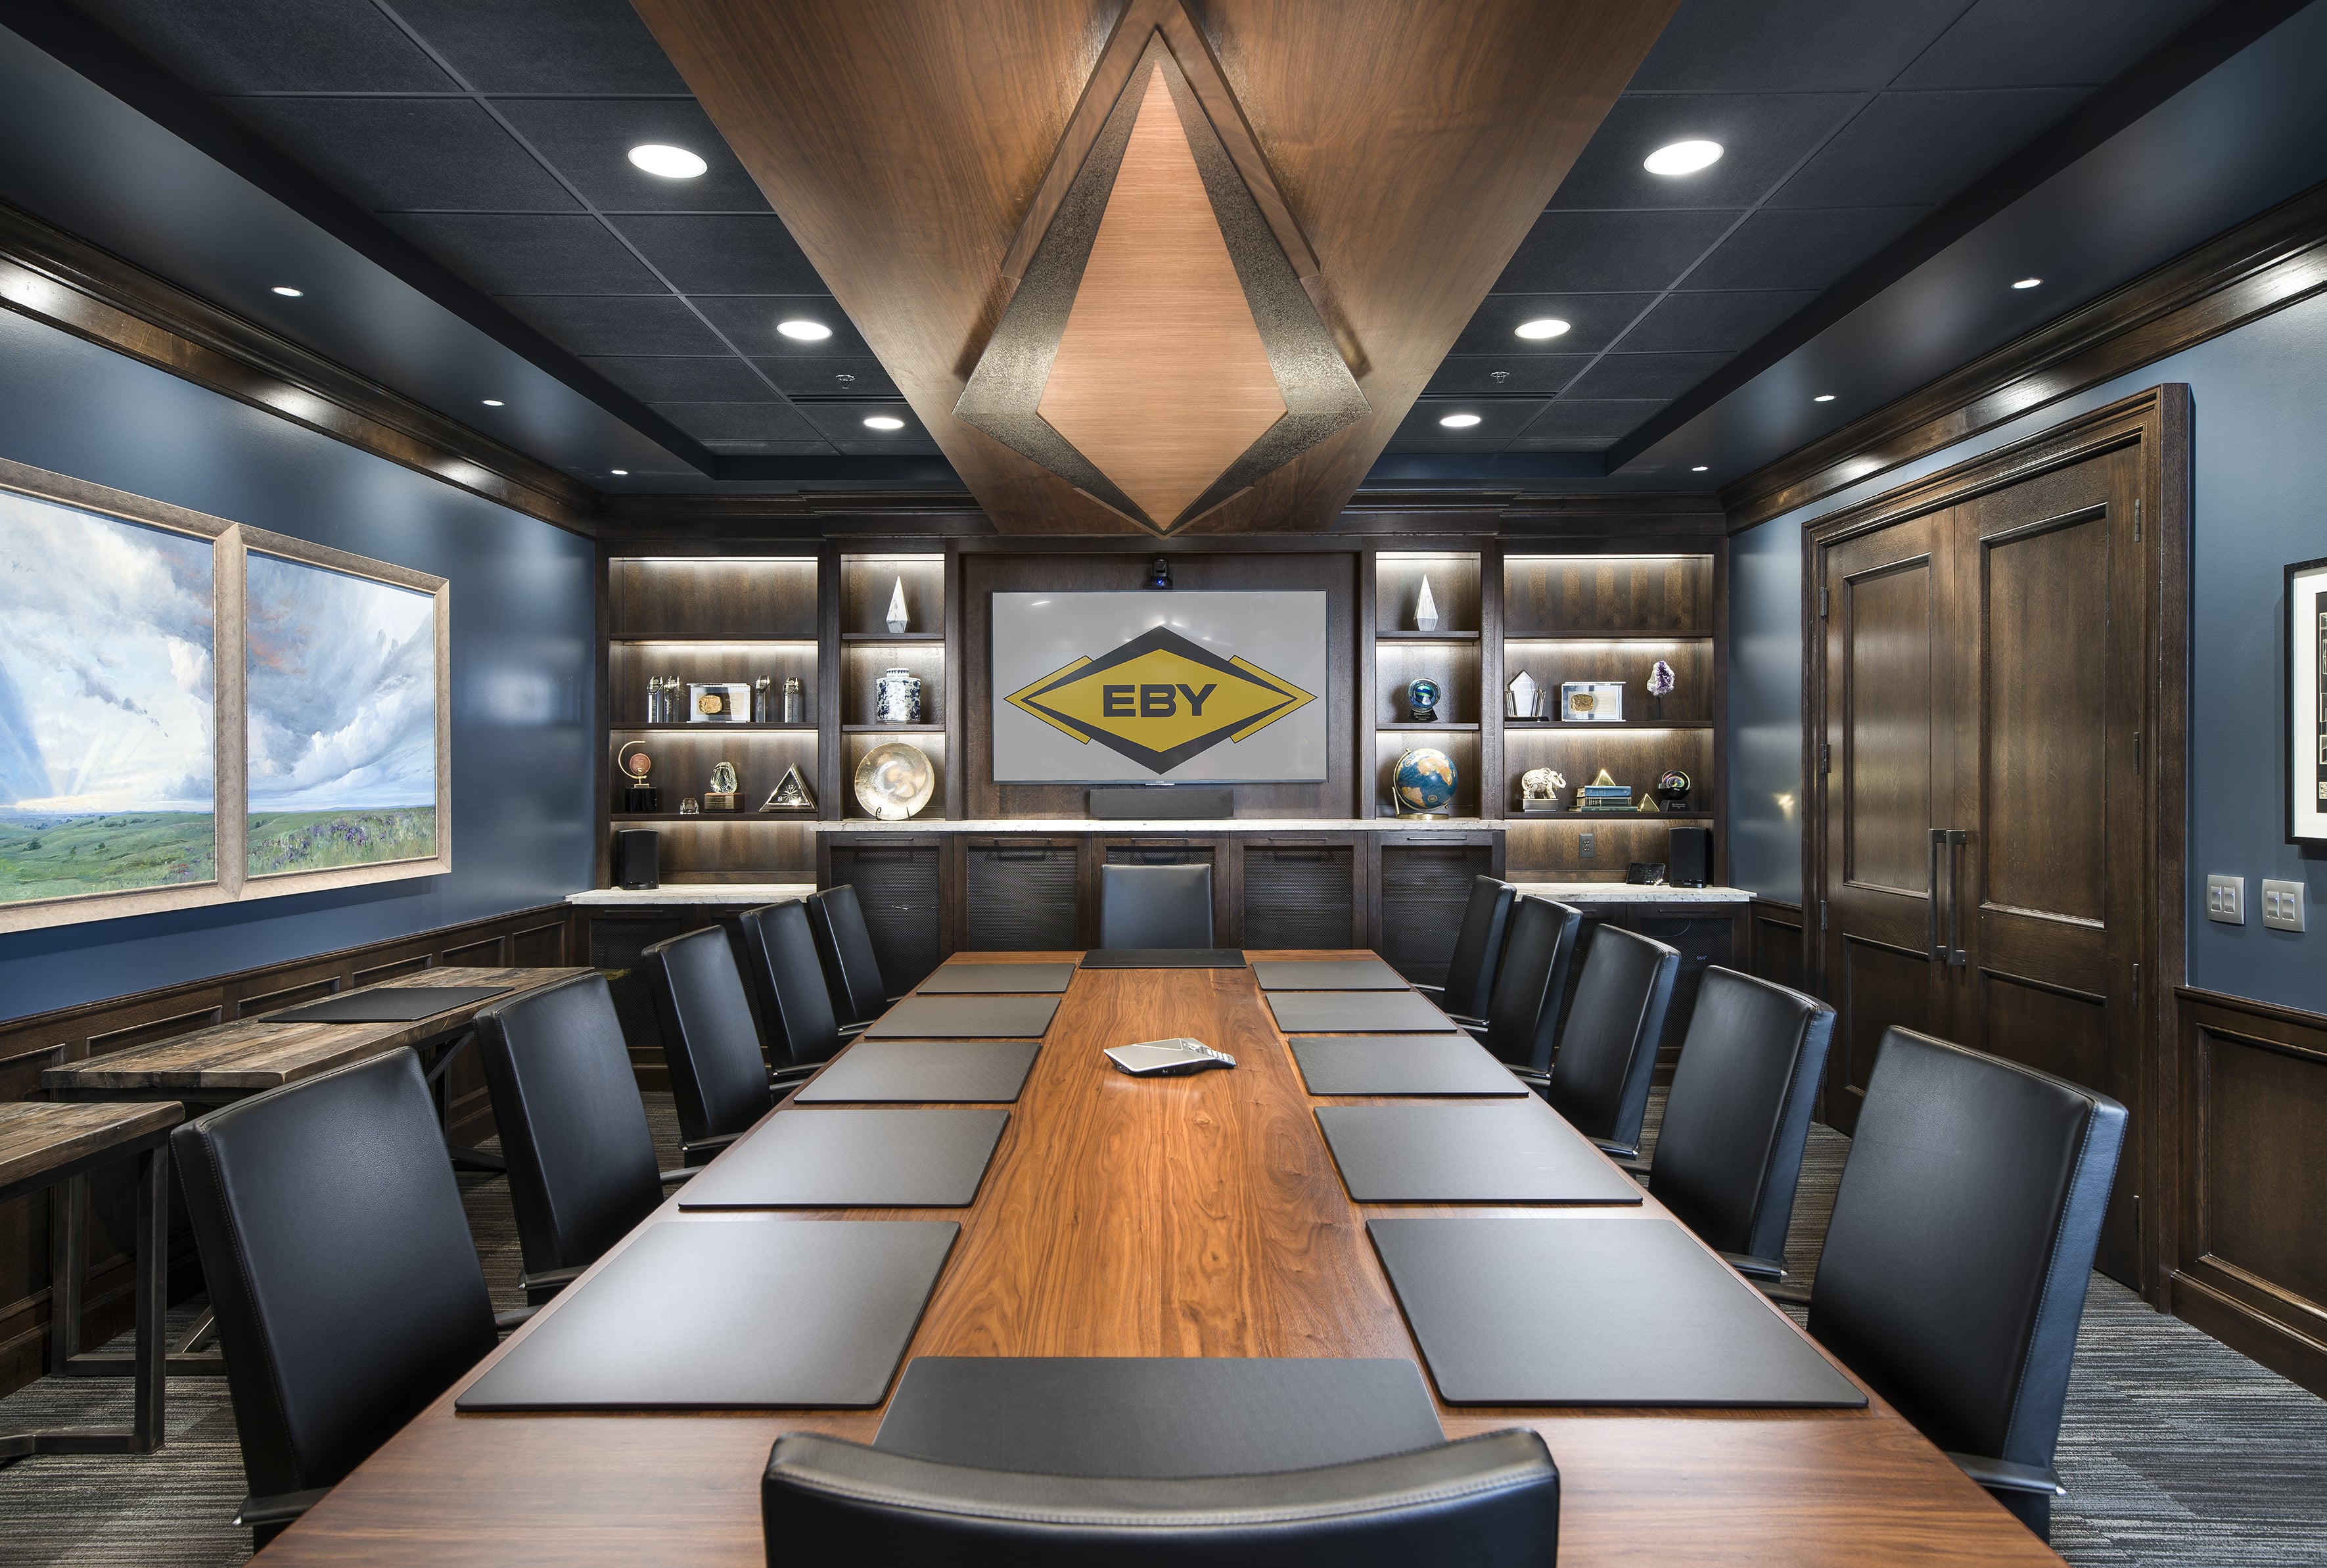 Eby Construction Meeting Room